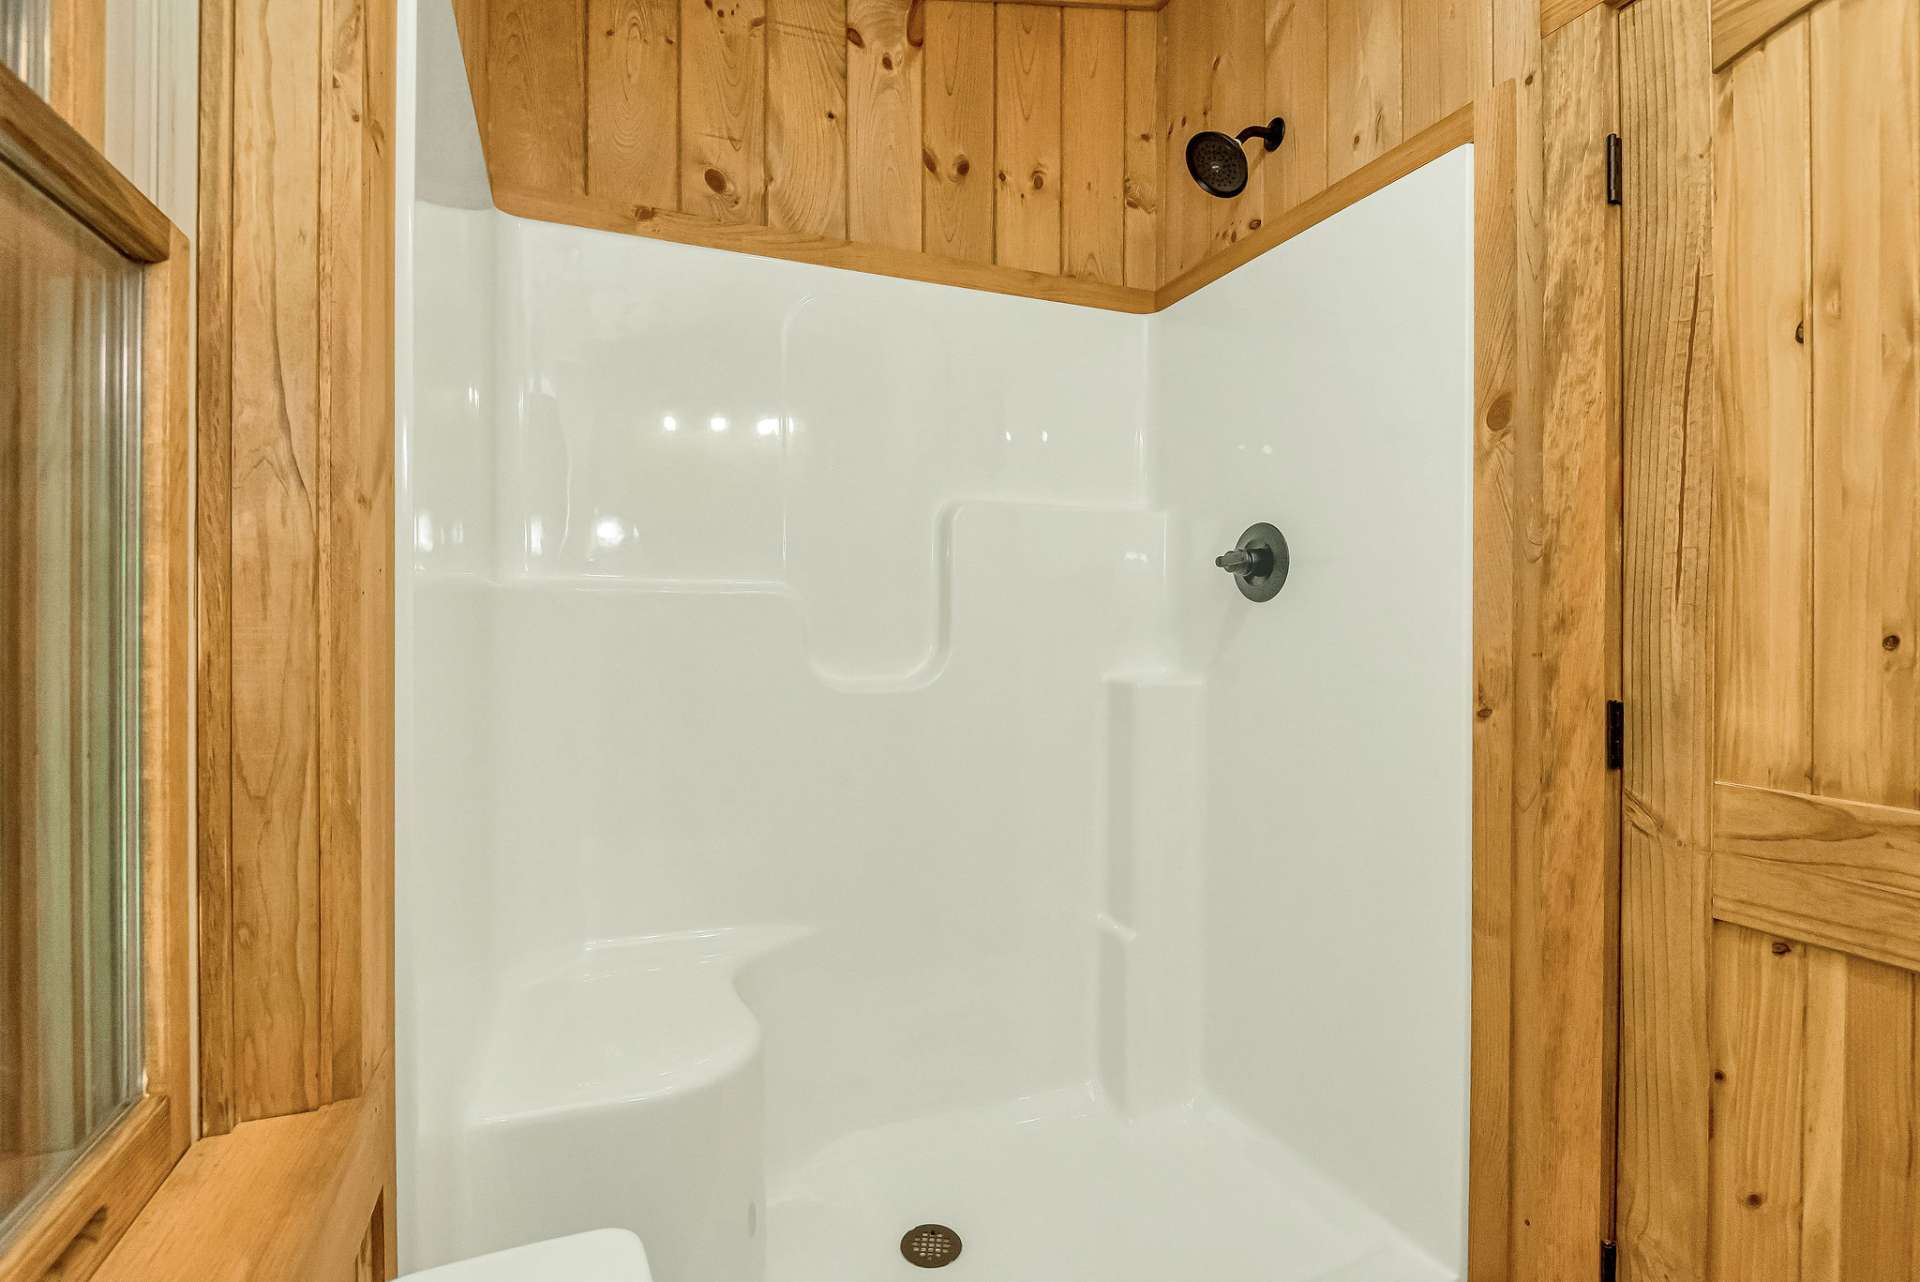 This bath includes a fiberglass tub/shower combination, providing a comfortable and functional space for bathing and showering.